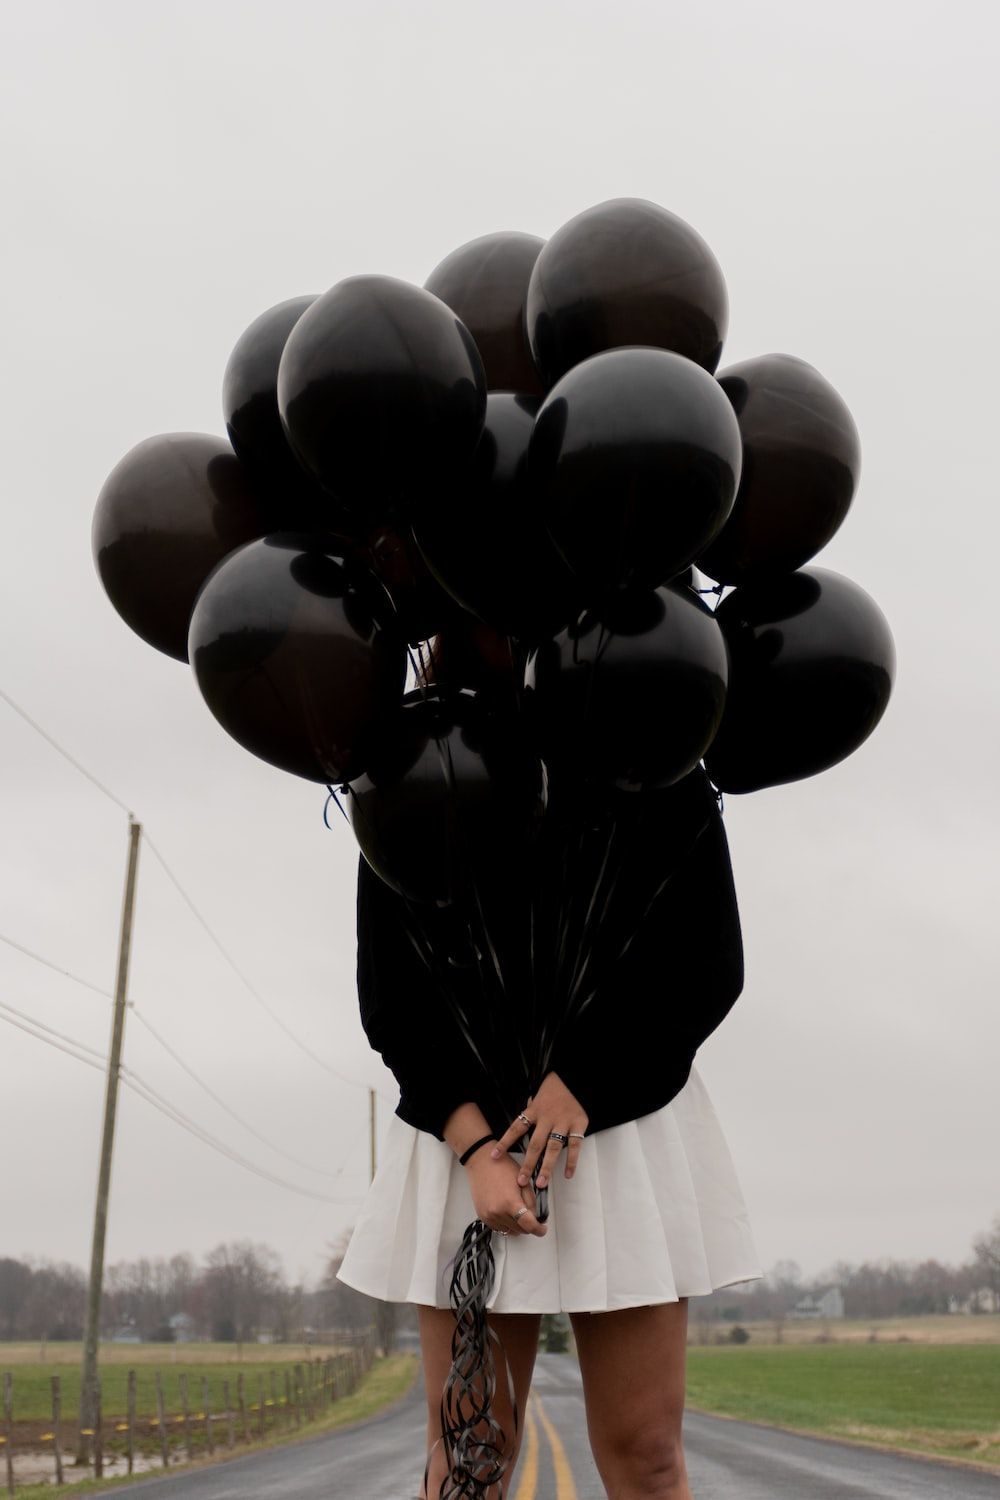 A woman holding black balloons on a road - Balloons